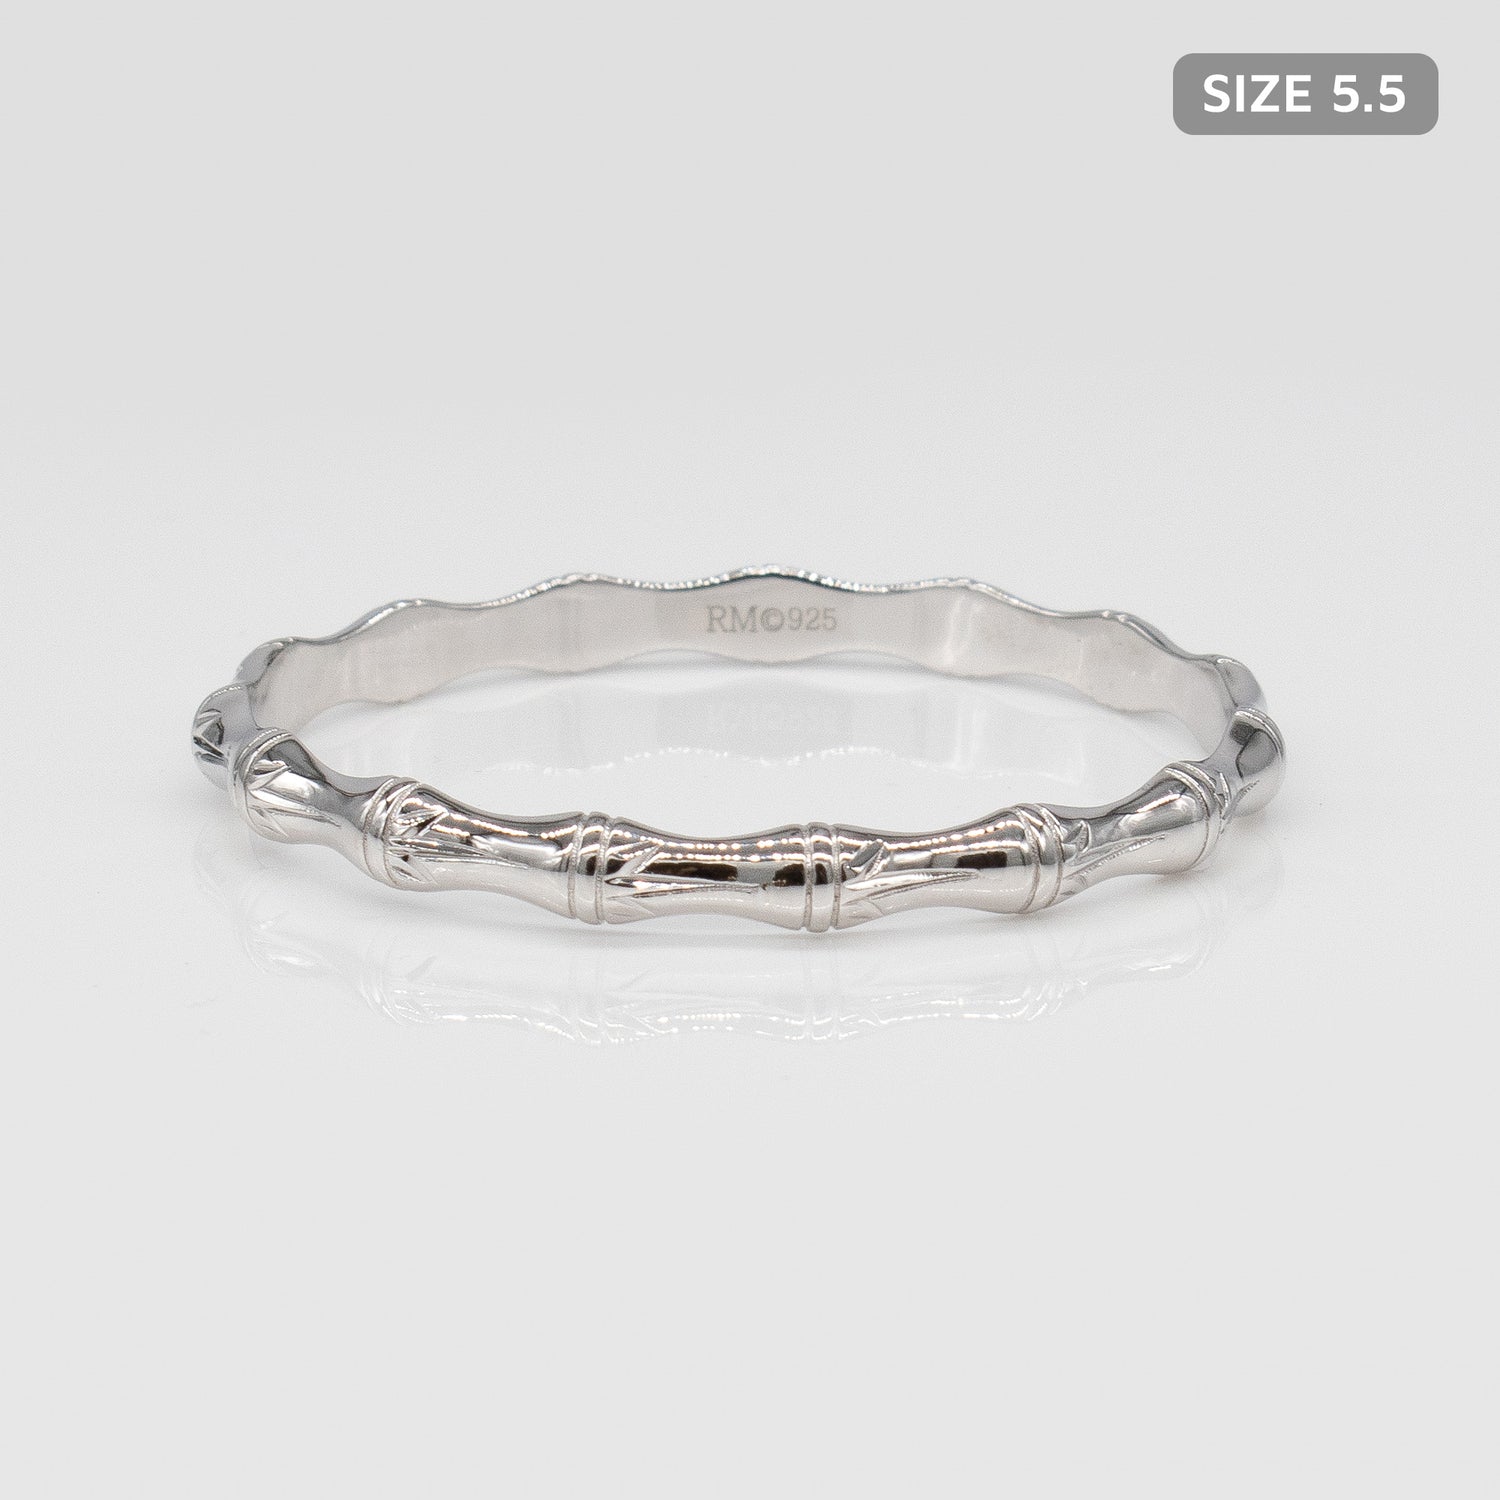 Kids Sterling Silver and Rhodium Bamboo Design Rosa Bangle. Size 5.5.